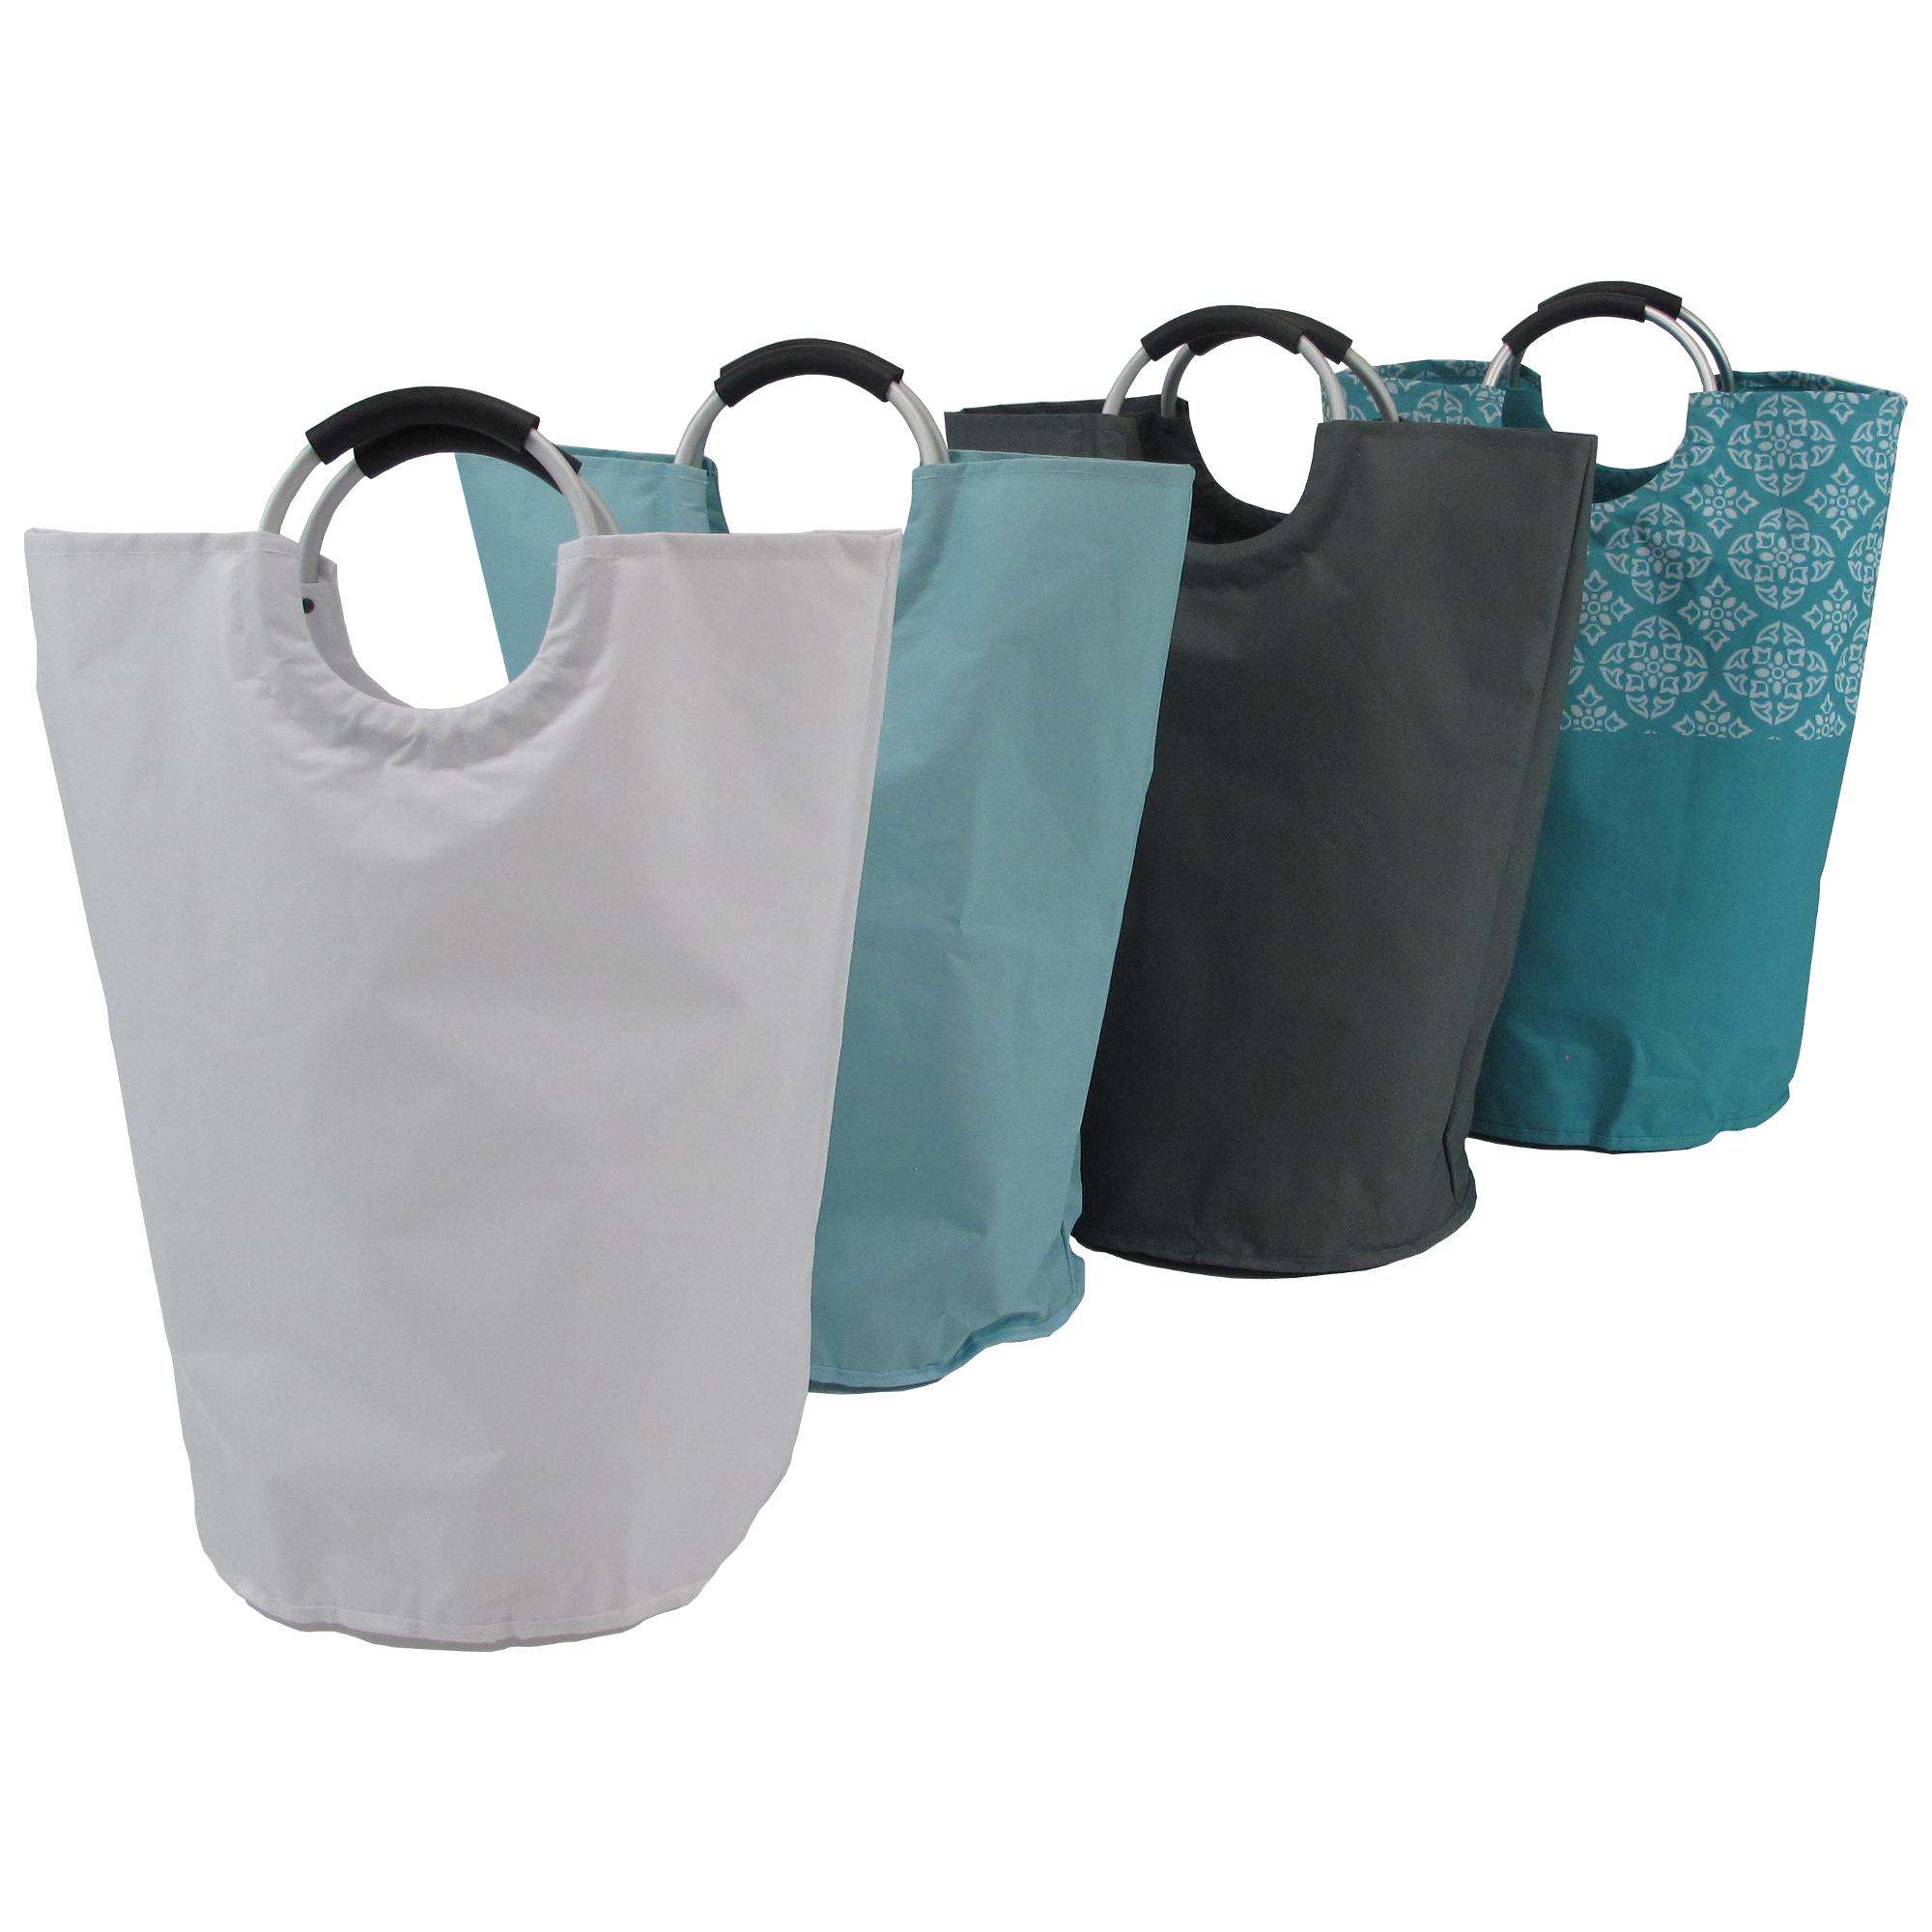 Soft Handle Chic Laundry TOTE BAGs - Choose Your Color(s)